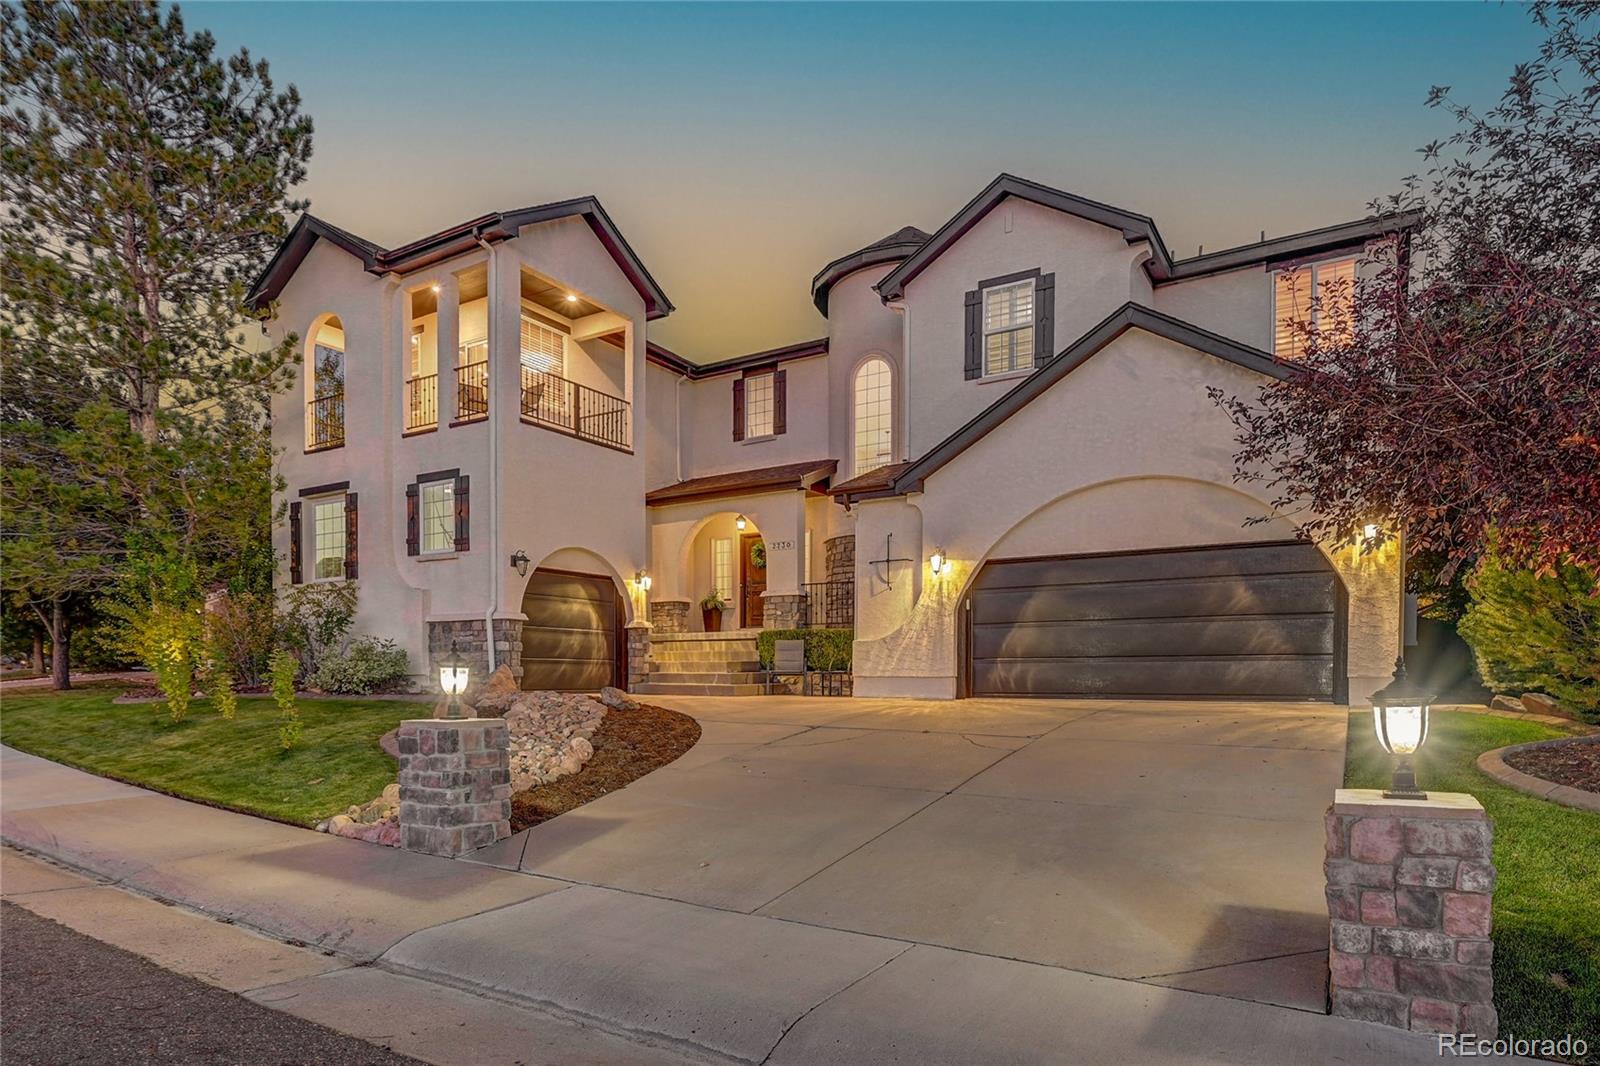 2730  Timberchase Trail, highlands ranch MLS: 7688549 Beds: 4 Baths: 4 Price: $1,475,000